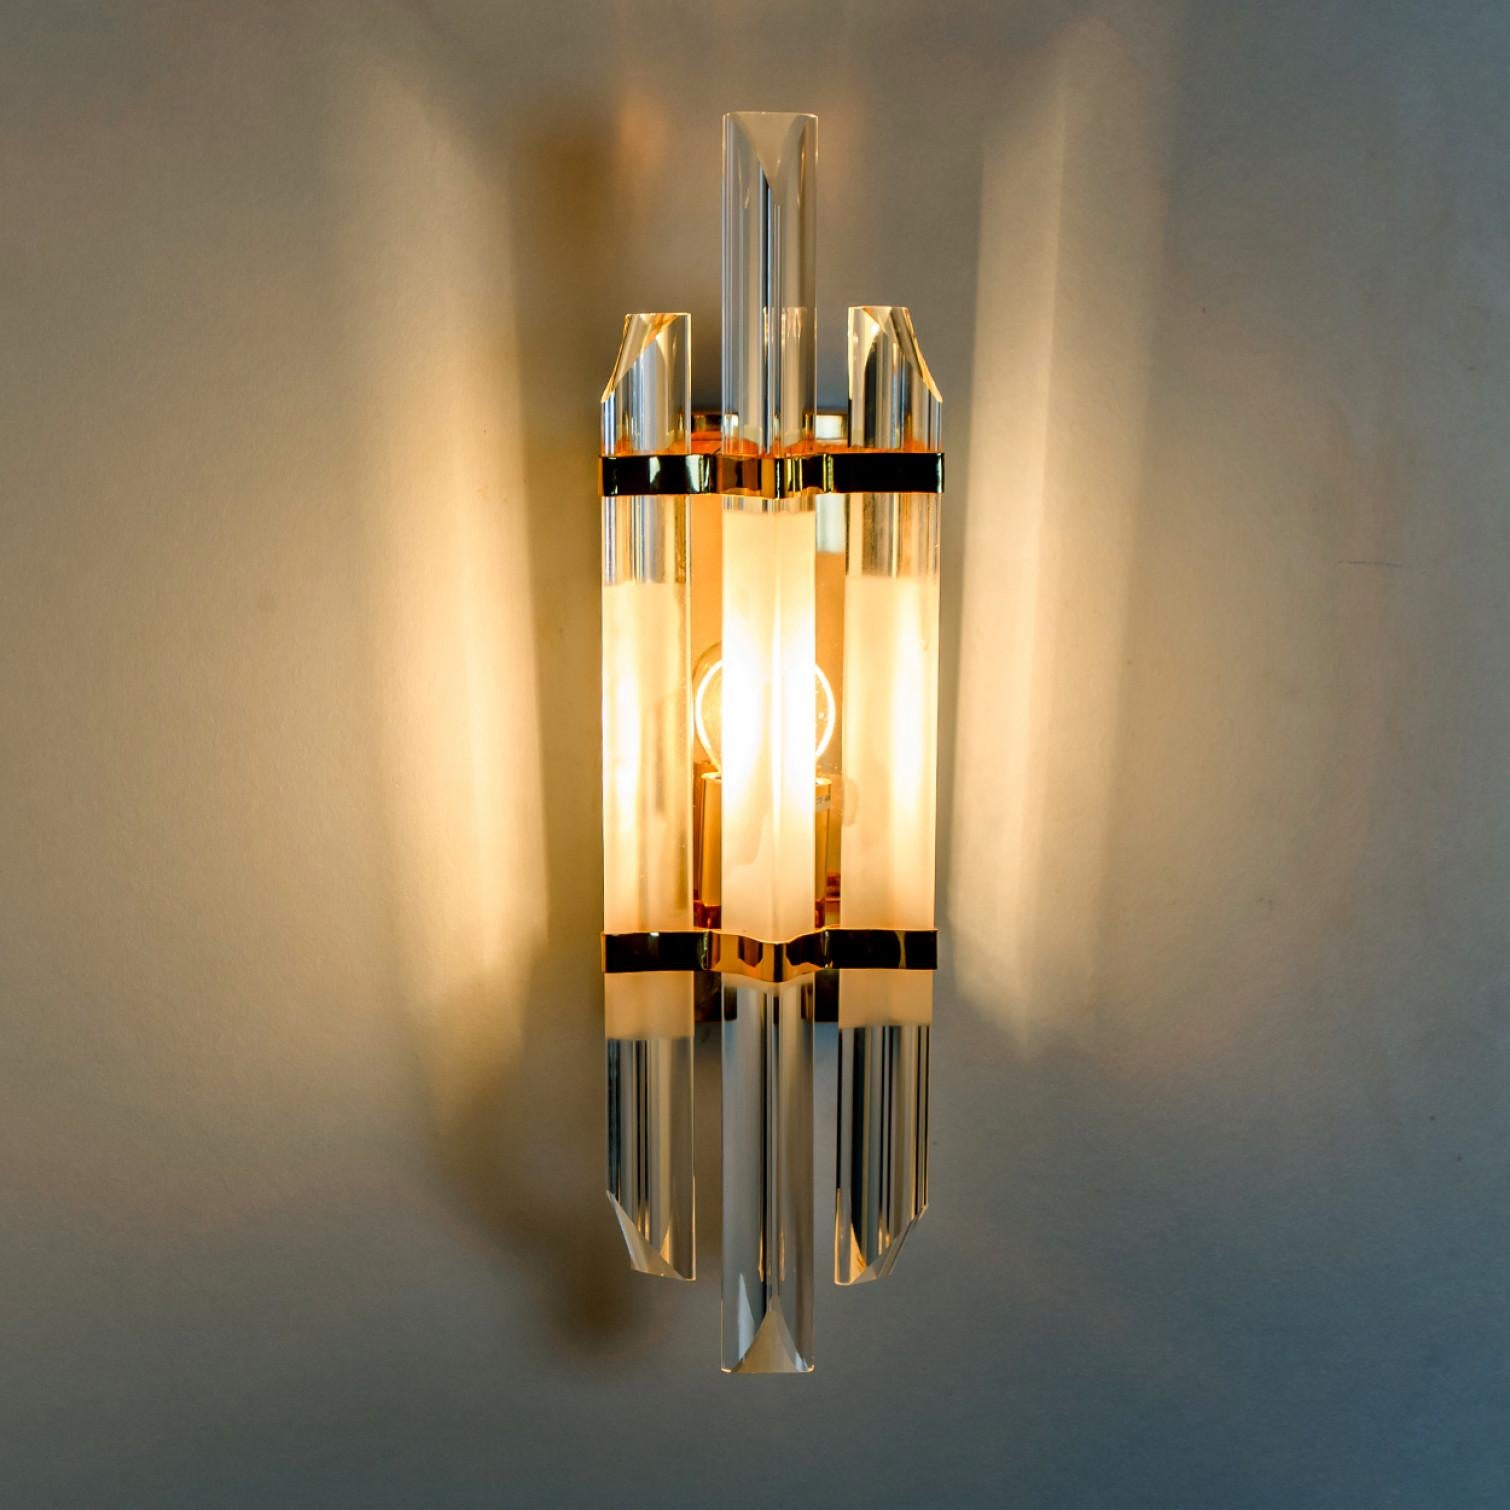 Beautiful triangle shaped glass wall sconces featuring three long crystal clear glass tube-like rods, with brass details and back plate. Illuminates beautifully. High-end pieces.

Cleaned and well-wired, in full working order and ready to use. The